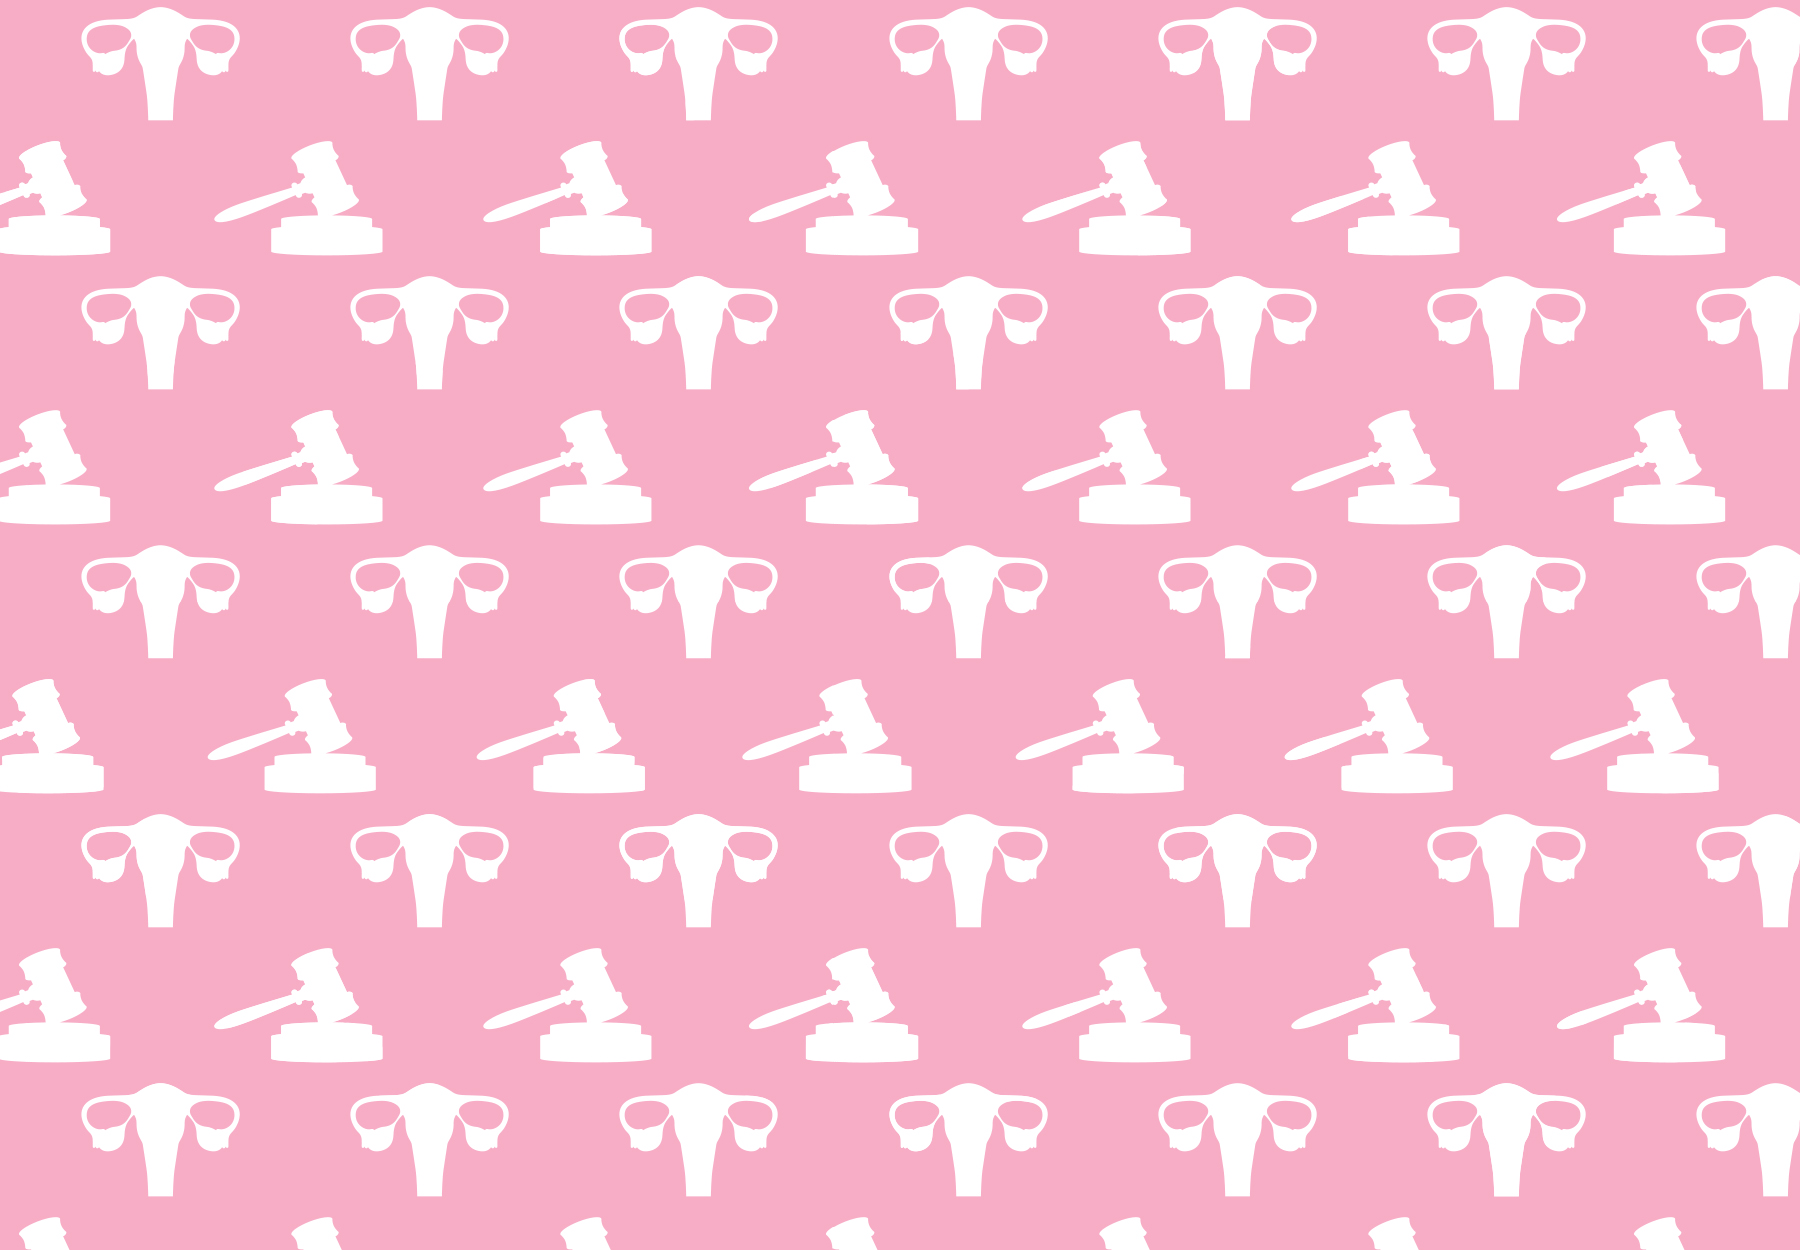 Vector seamless pattern of white gavels and uteruses on a pink square background to represent reproductive rights.